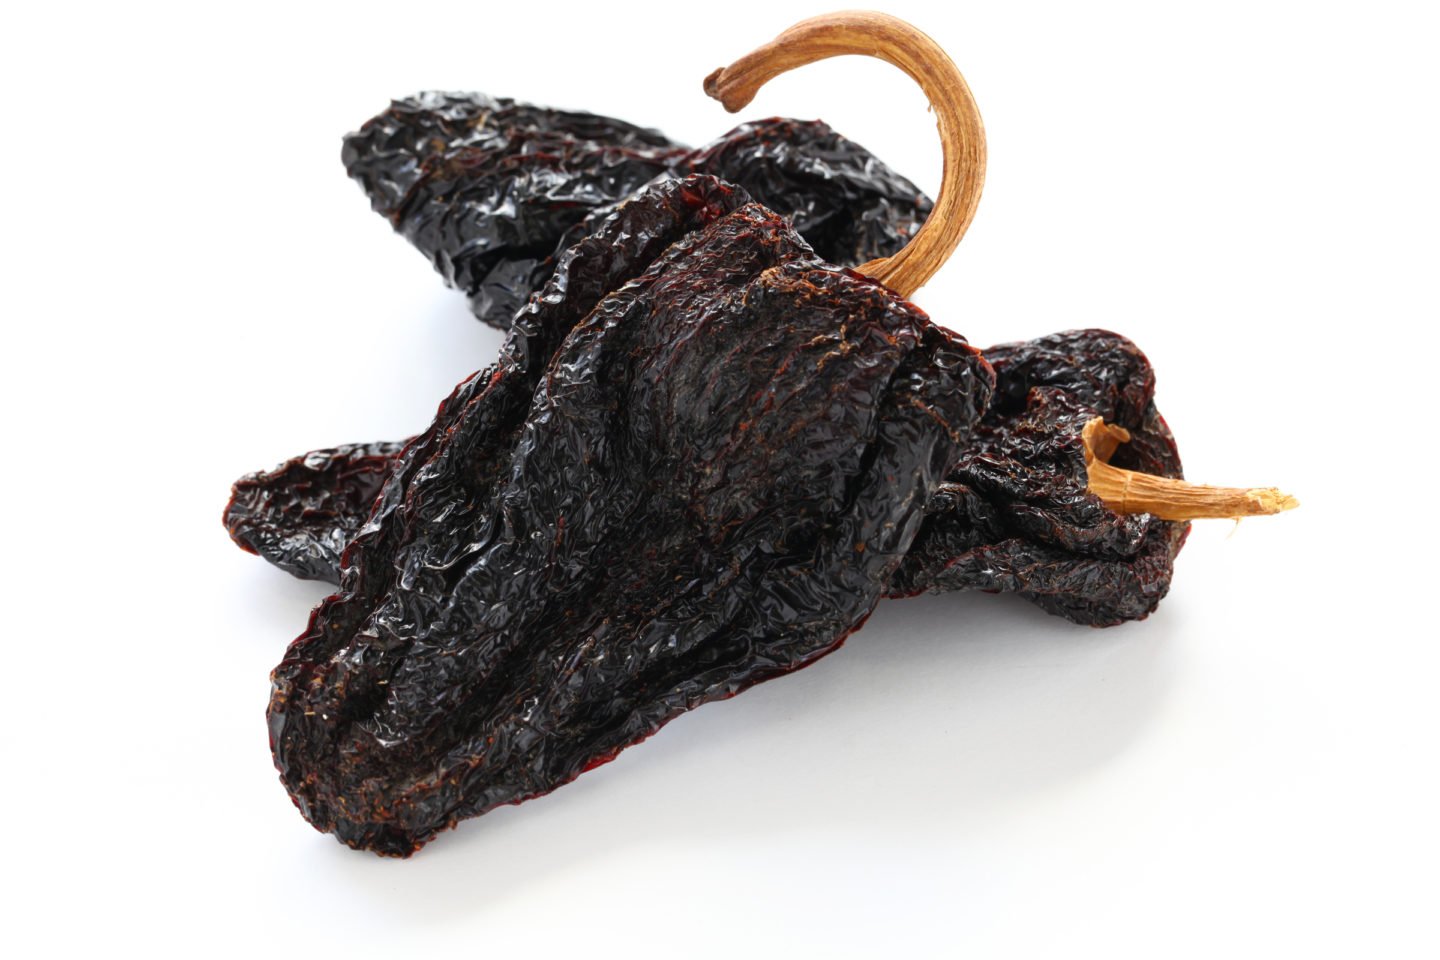 ancho chilis are good poblano pepper substitutes